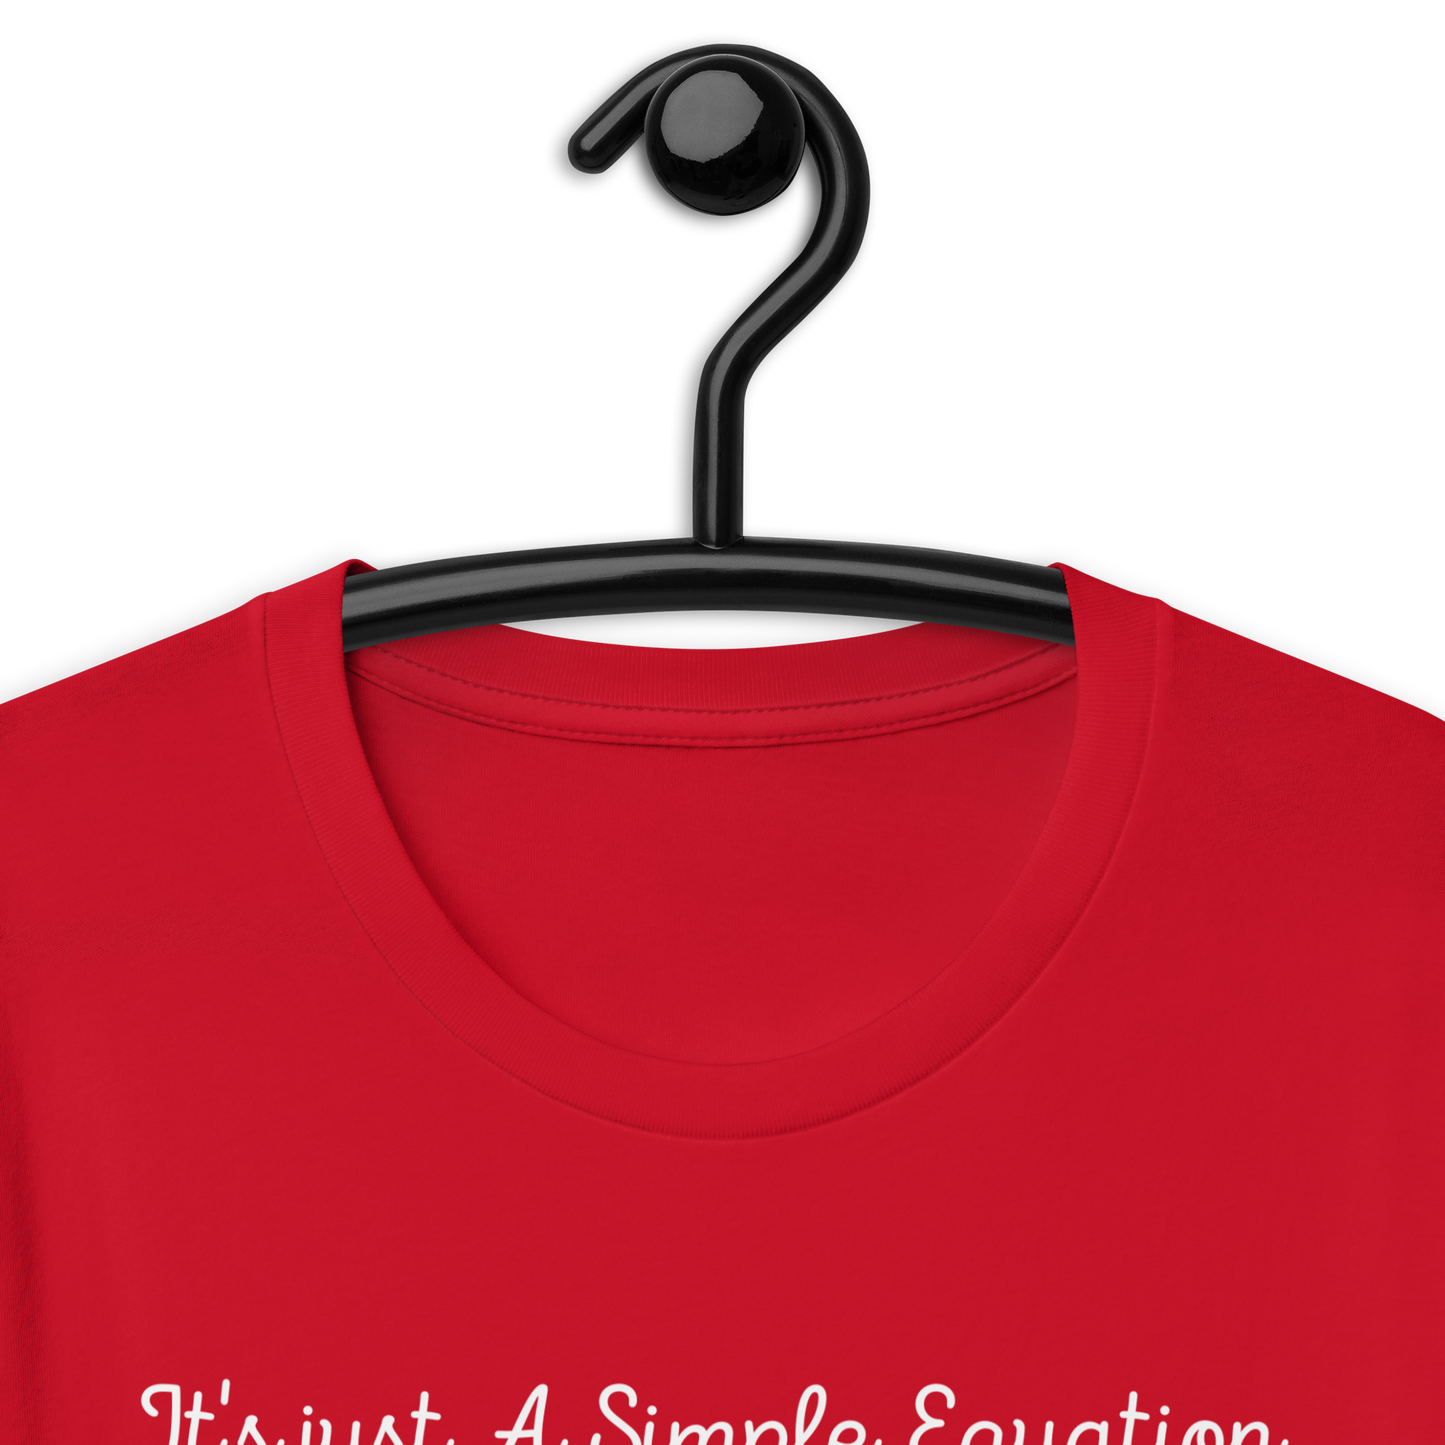 (It's Just a Simple Equation) Unisex t-shirt